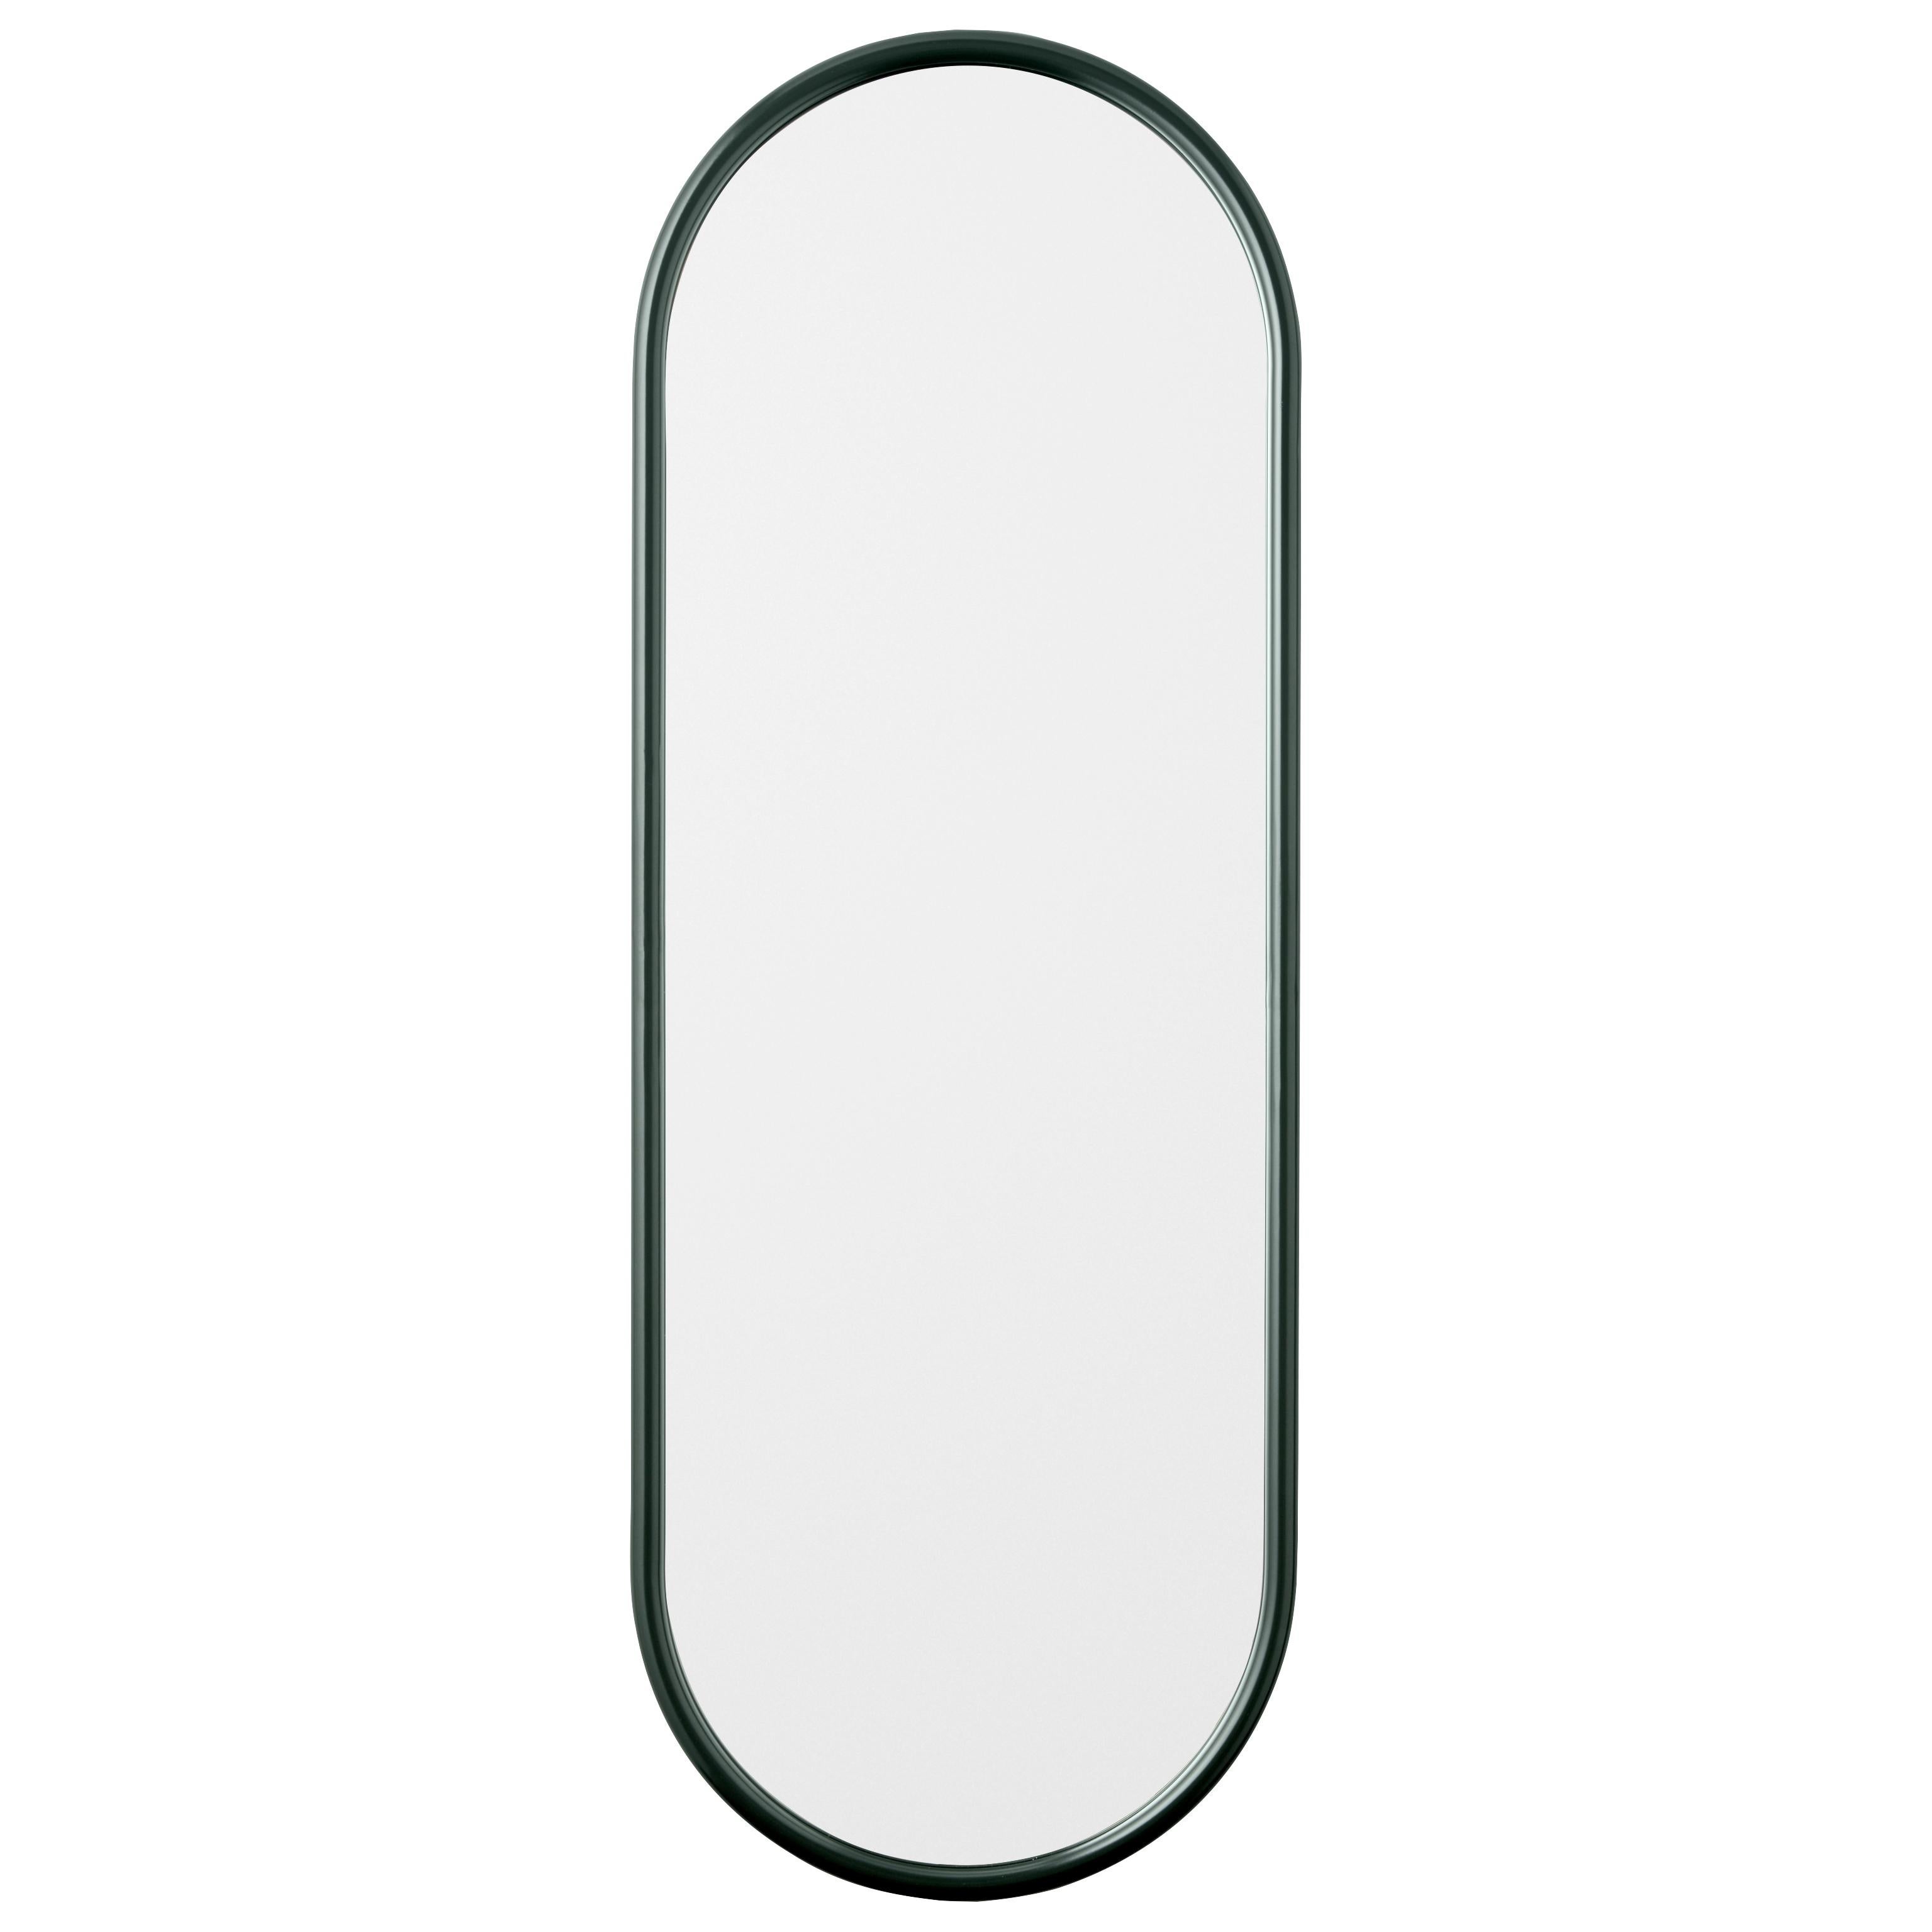 Angui Forest oval large mirror by AYTM
Dimensions: 39 x 2 x 108 cm
Materials: Glass, copper, MDF

The Angui mirror with its simple pipe-styled frame is a beauty for any bathroom, hallway, or maybe bedroom. Use a single one or add several together.